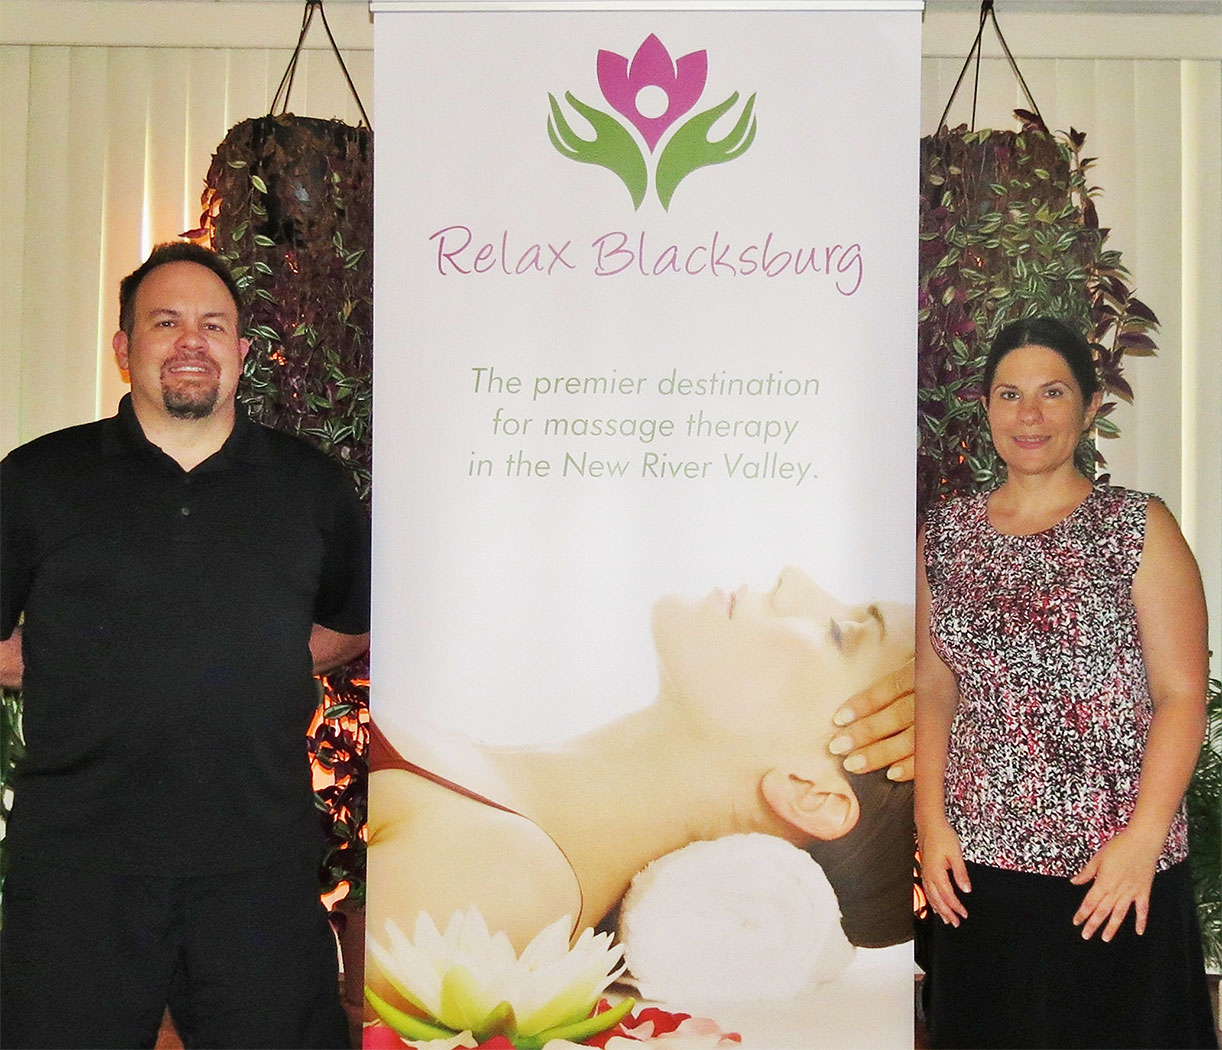 Melissa and Brian proudly presenting their "Relax Blacksburg" clinic.